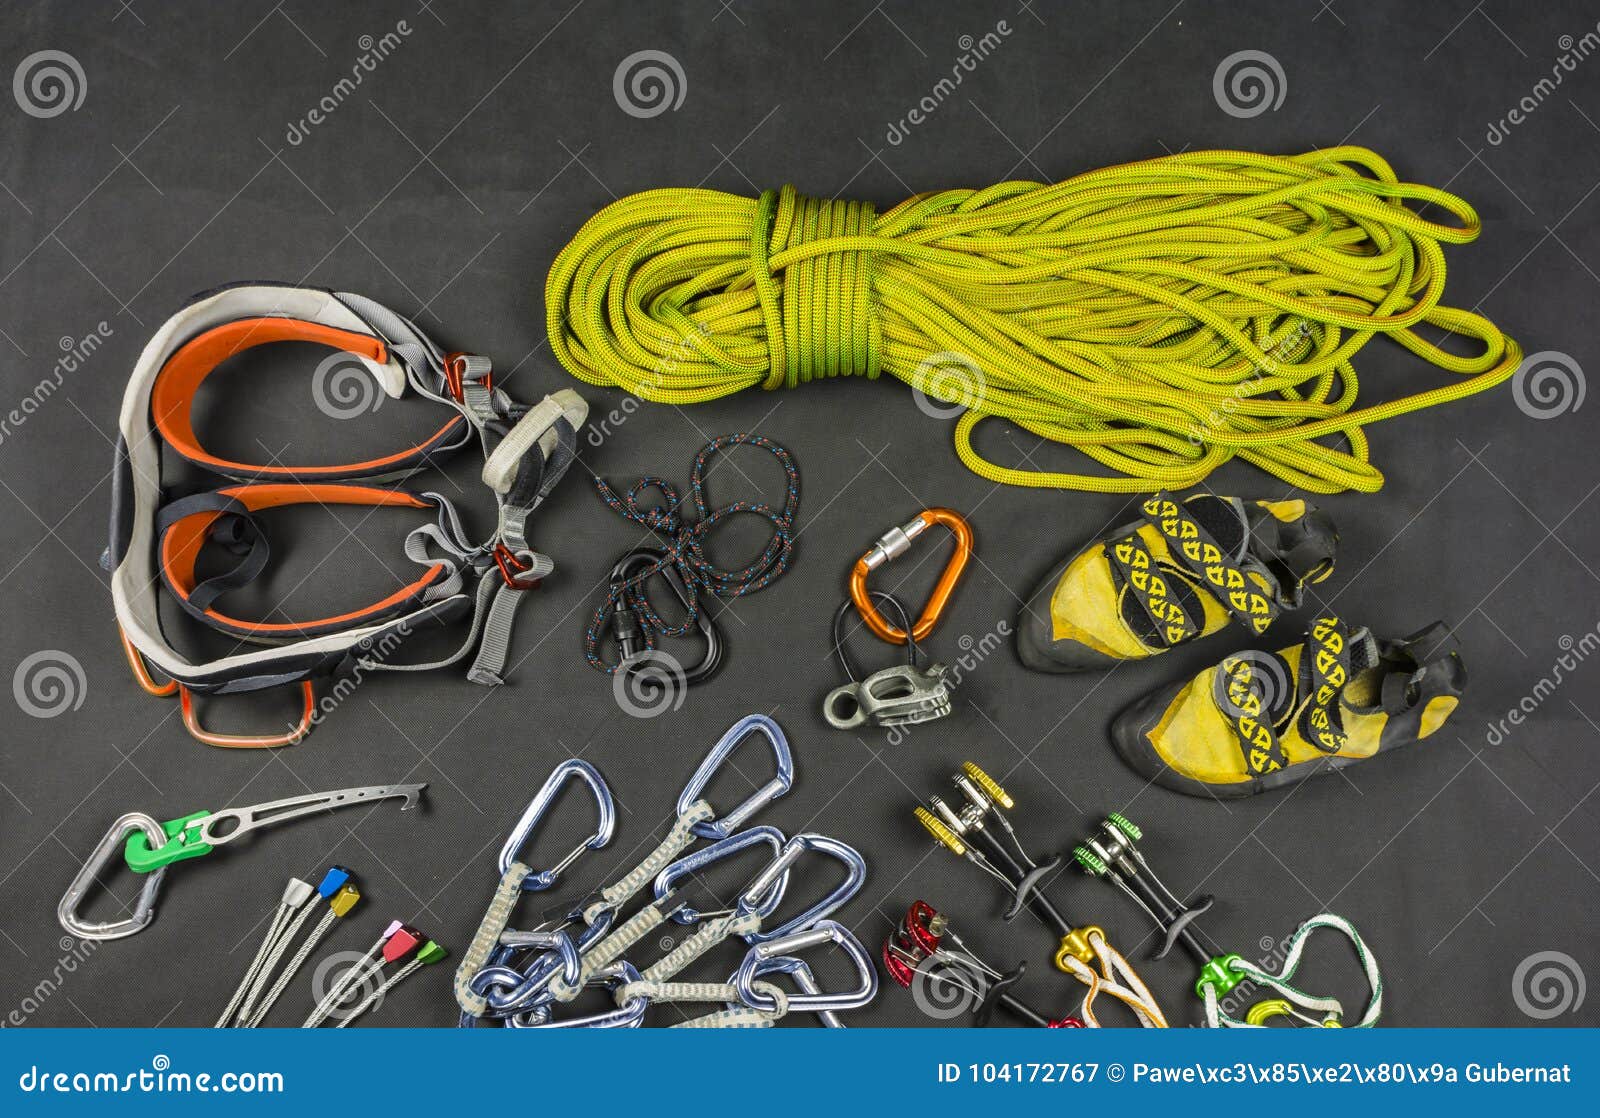 Traditional Climbing - Basic Equipment of the Climber. Stock Image ...